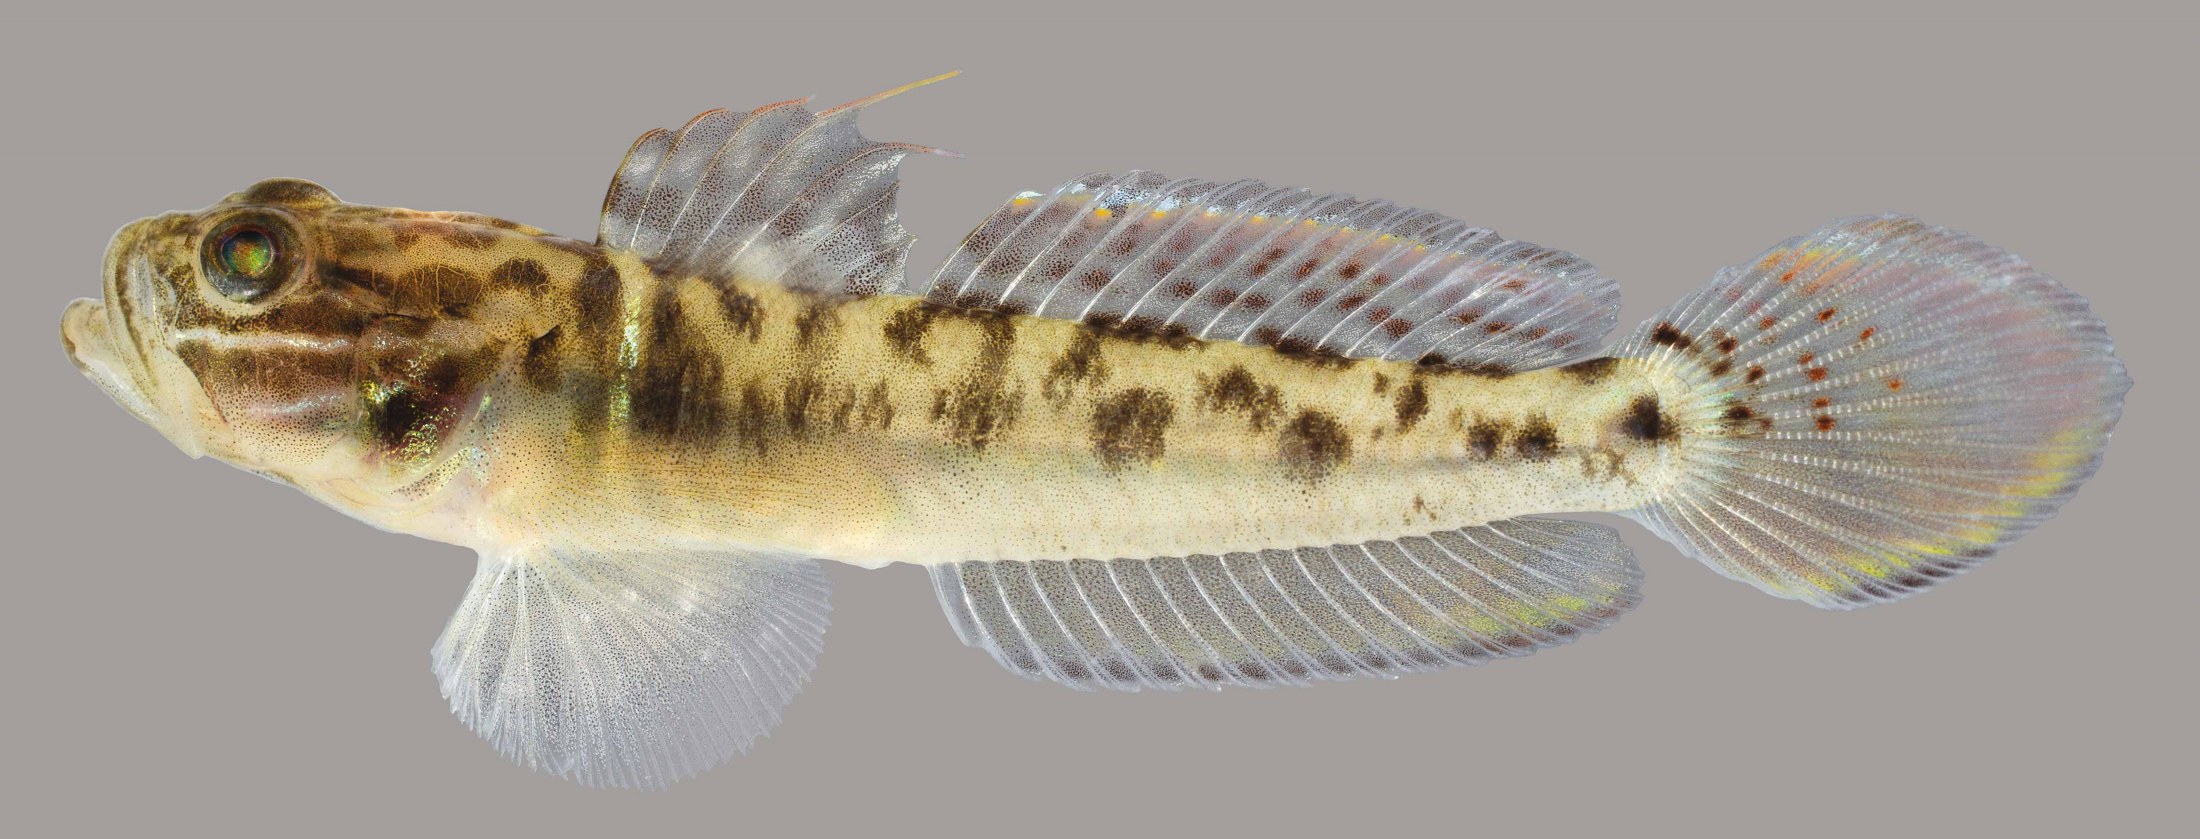 Lateral view of a clown goby